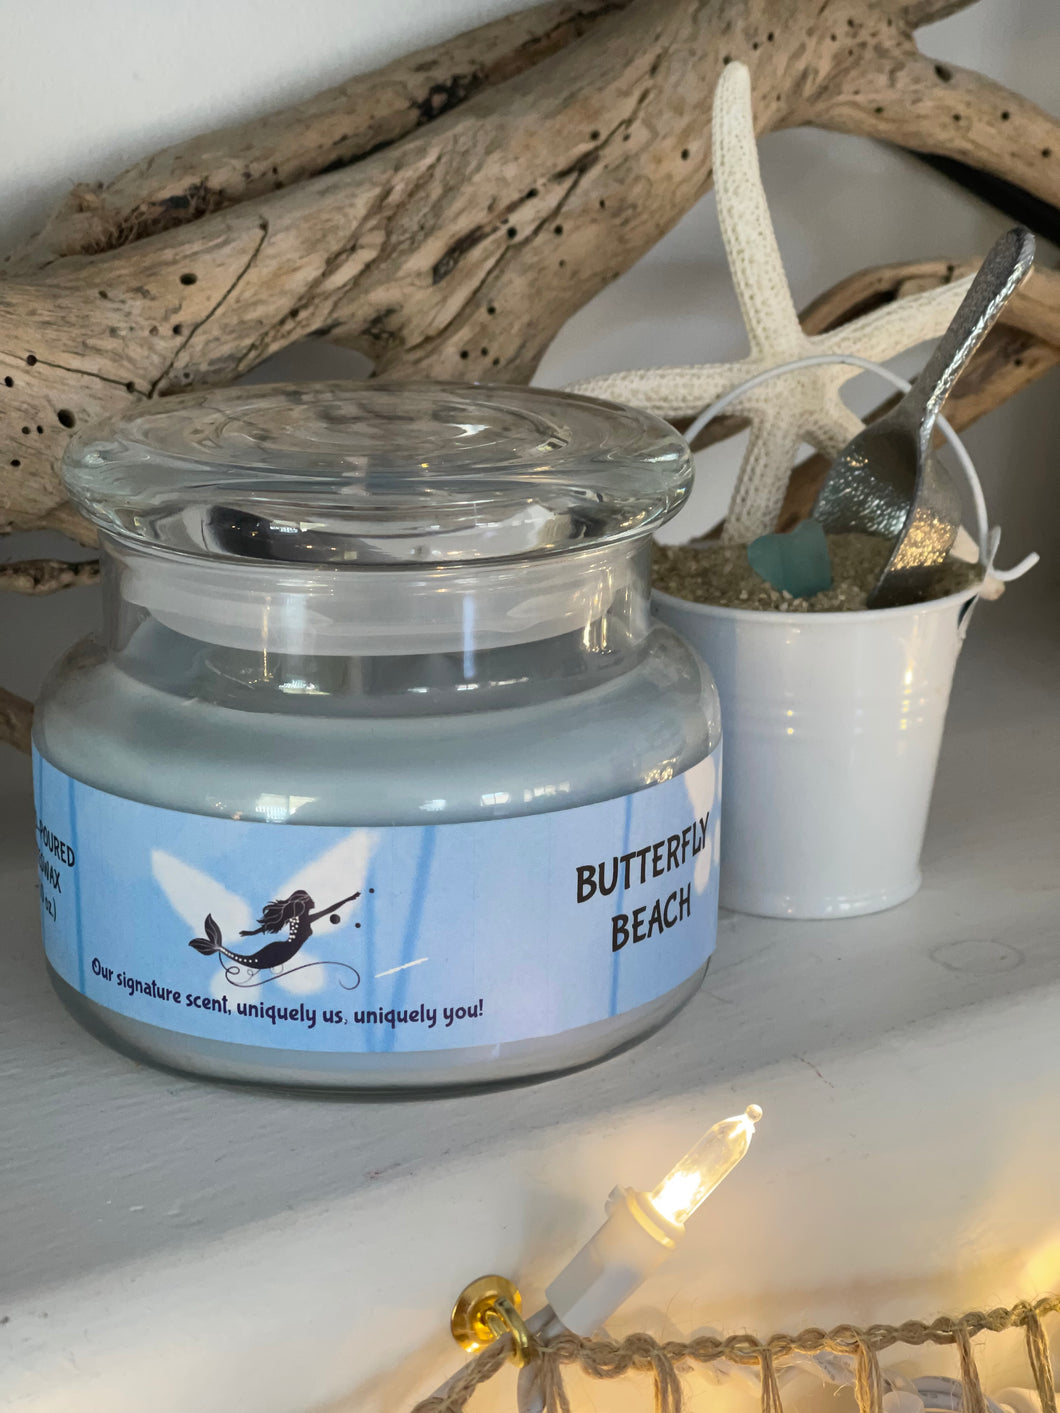 Butterfly Beach-Our Santa Barbara Coastal Candle Signature Scent